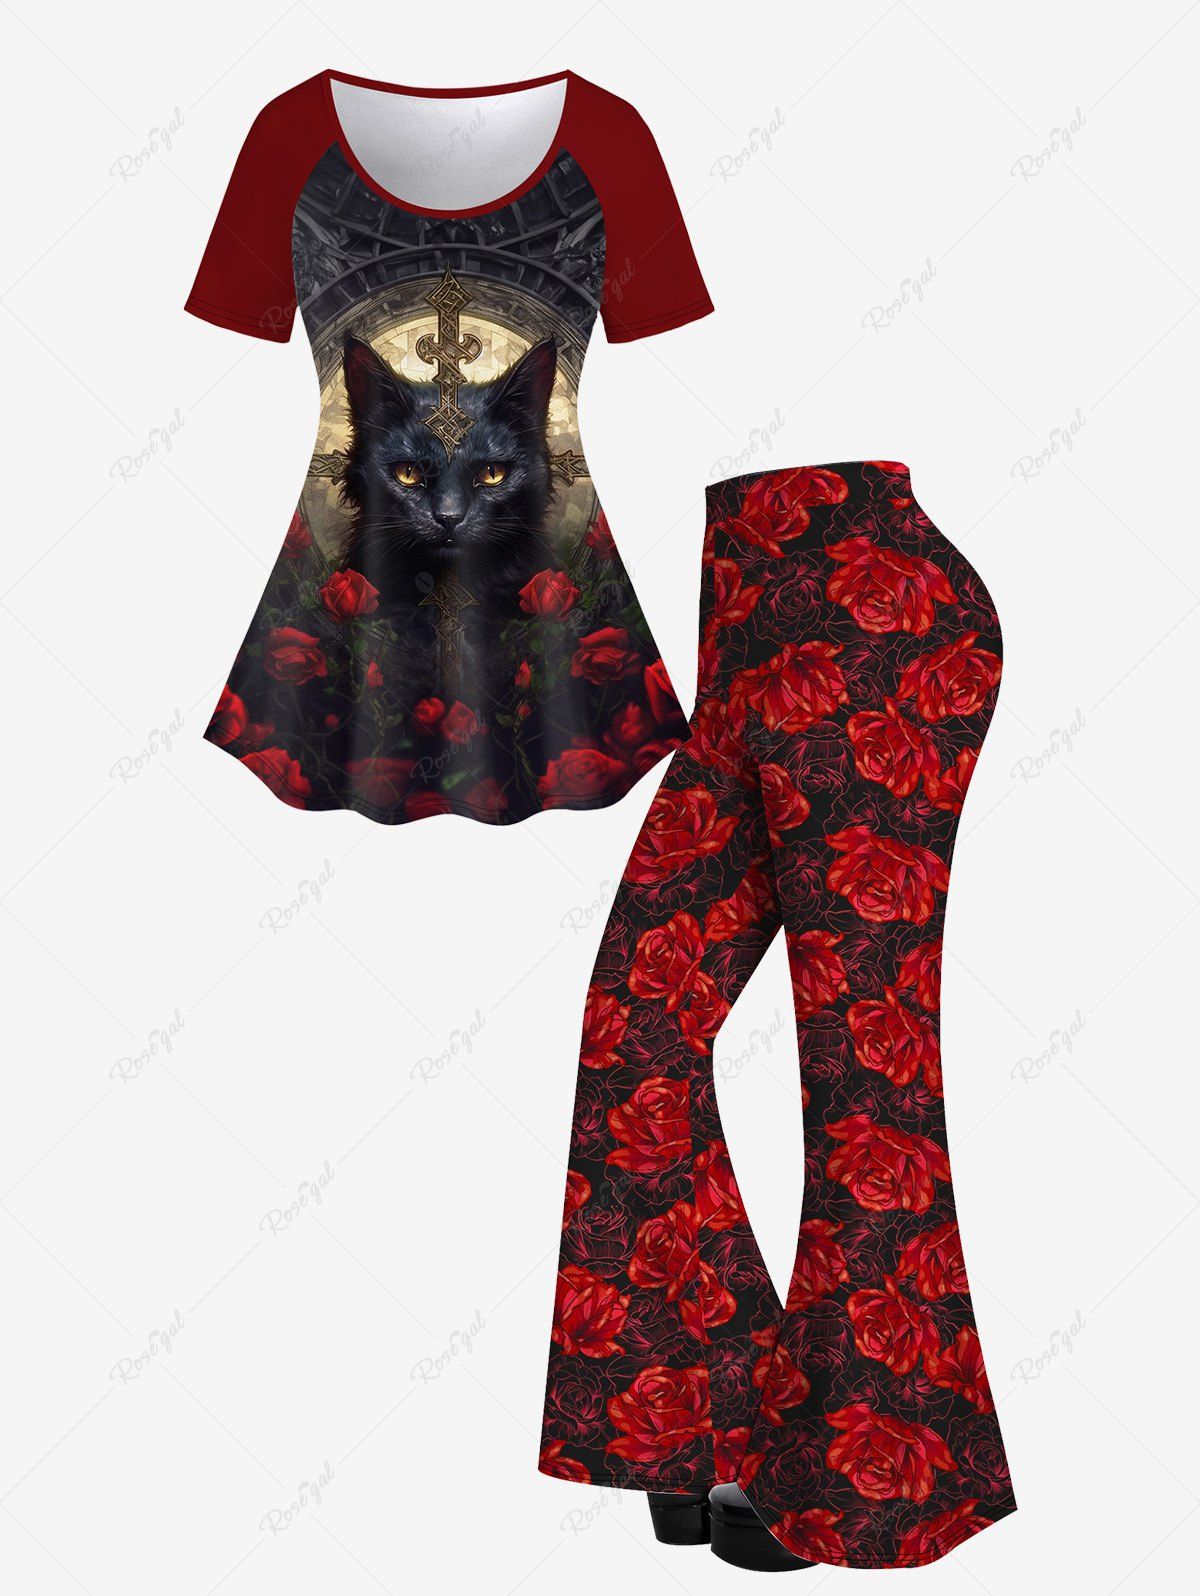 New Rose Cat Print Short Sleeves T-shirt And Flower Print Flare Pants Gothic Outfit  